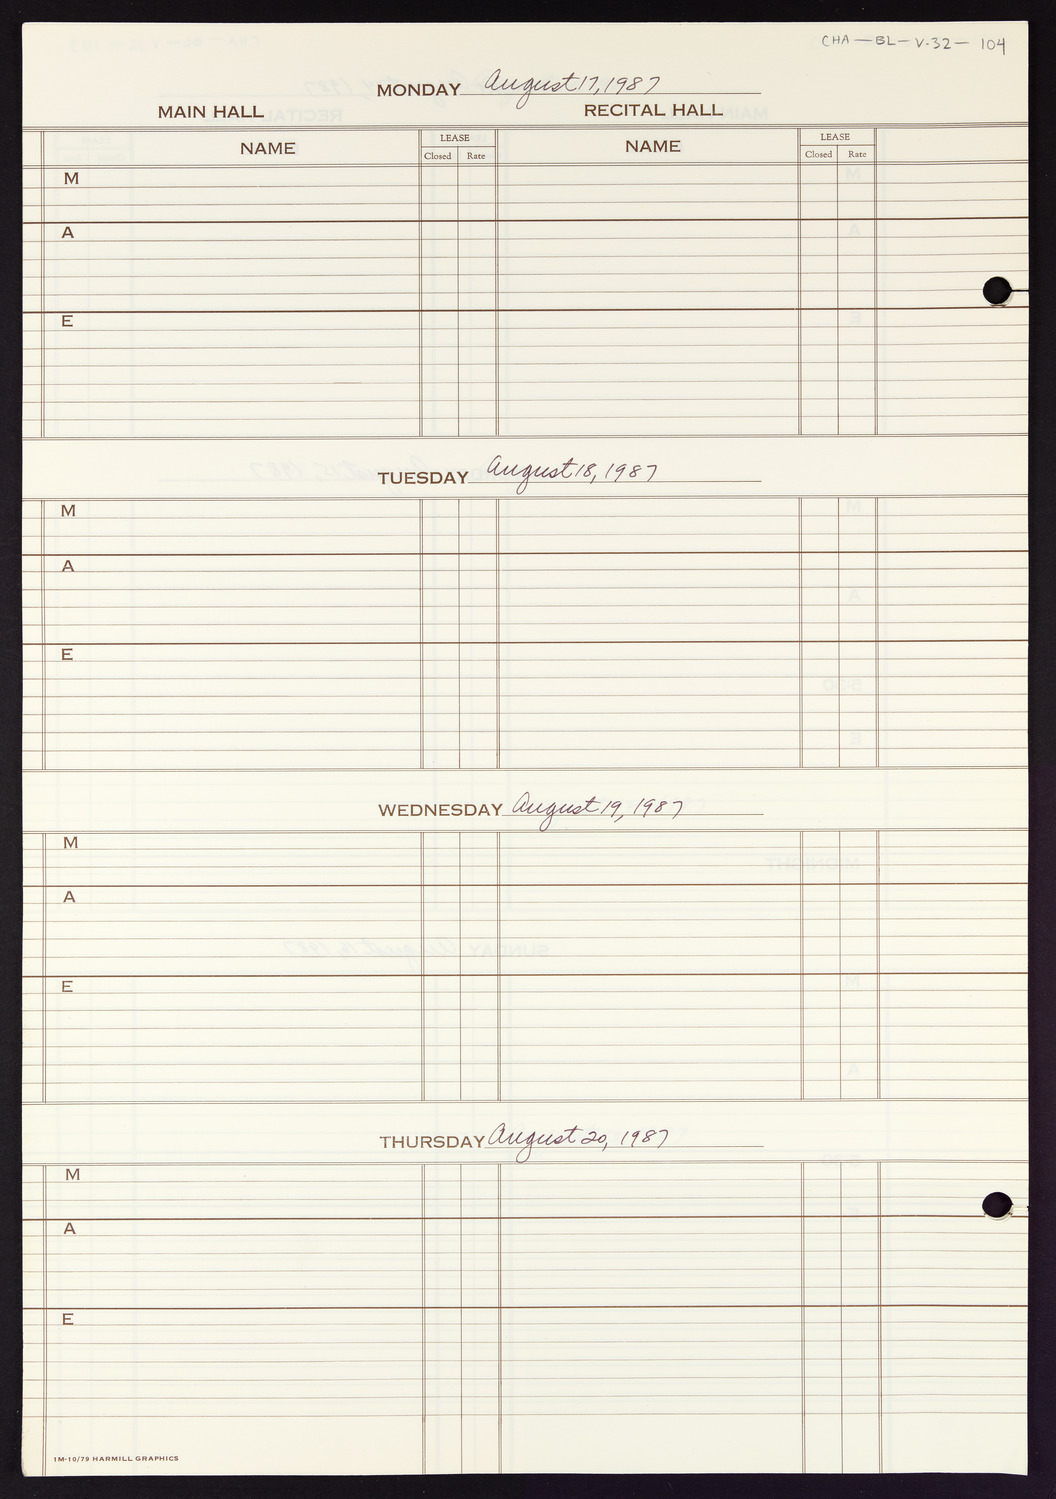 Carnegie Hall Booking Ledger, volume 32, page 104